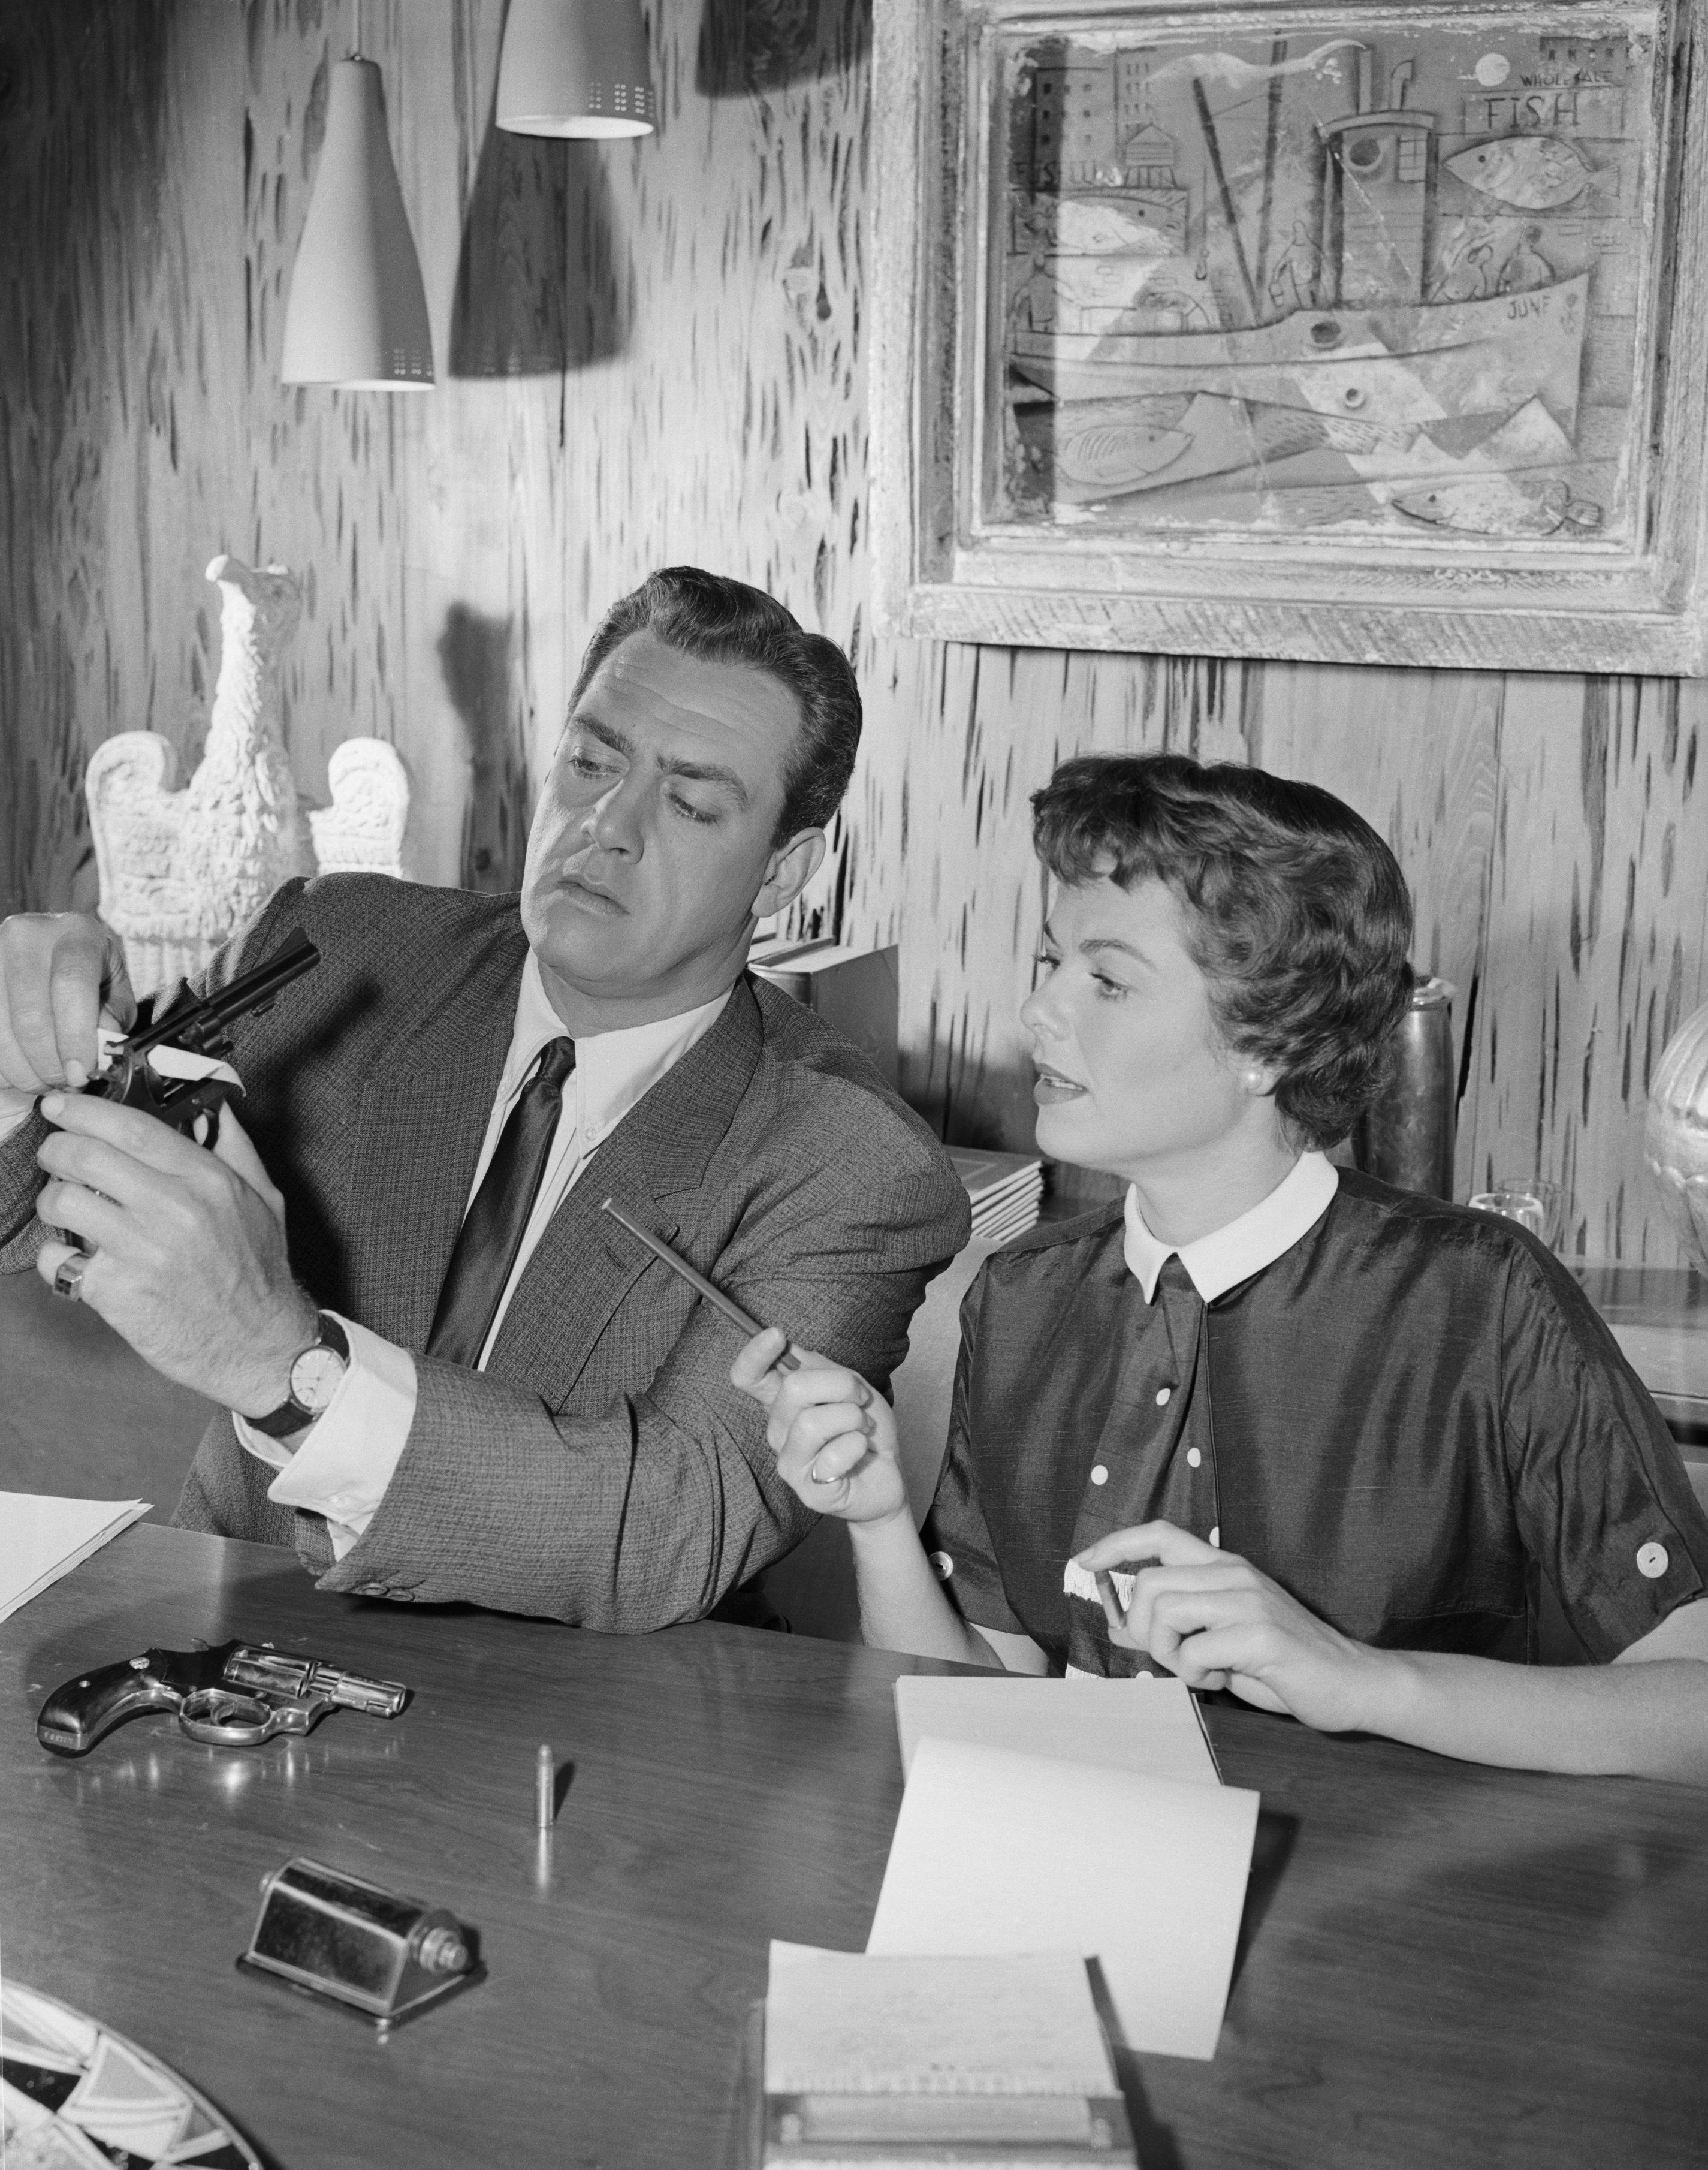 Raymond Burr with co-star actress Barbara Hale as Perry Mason and Della Street in the TV series "Perry Mason" which aired from 1957 to 1966. | Source: Getty Images